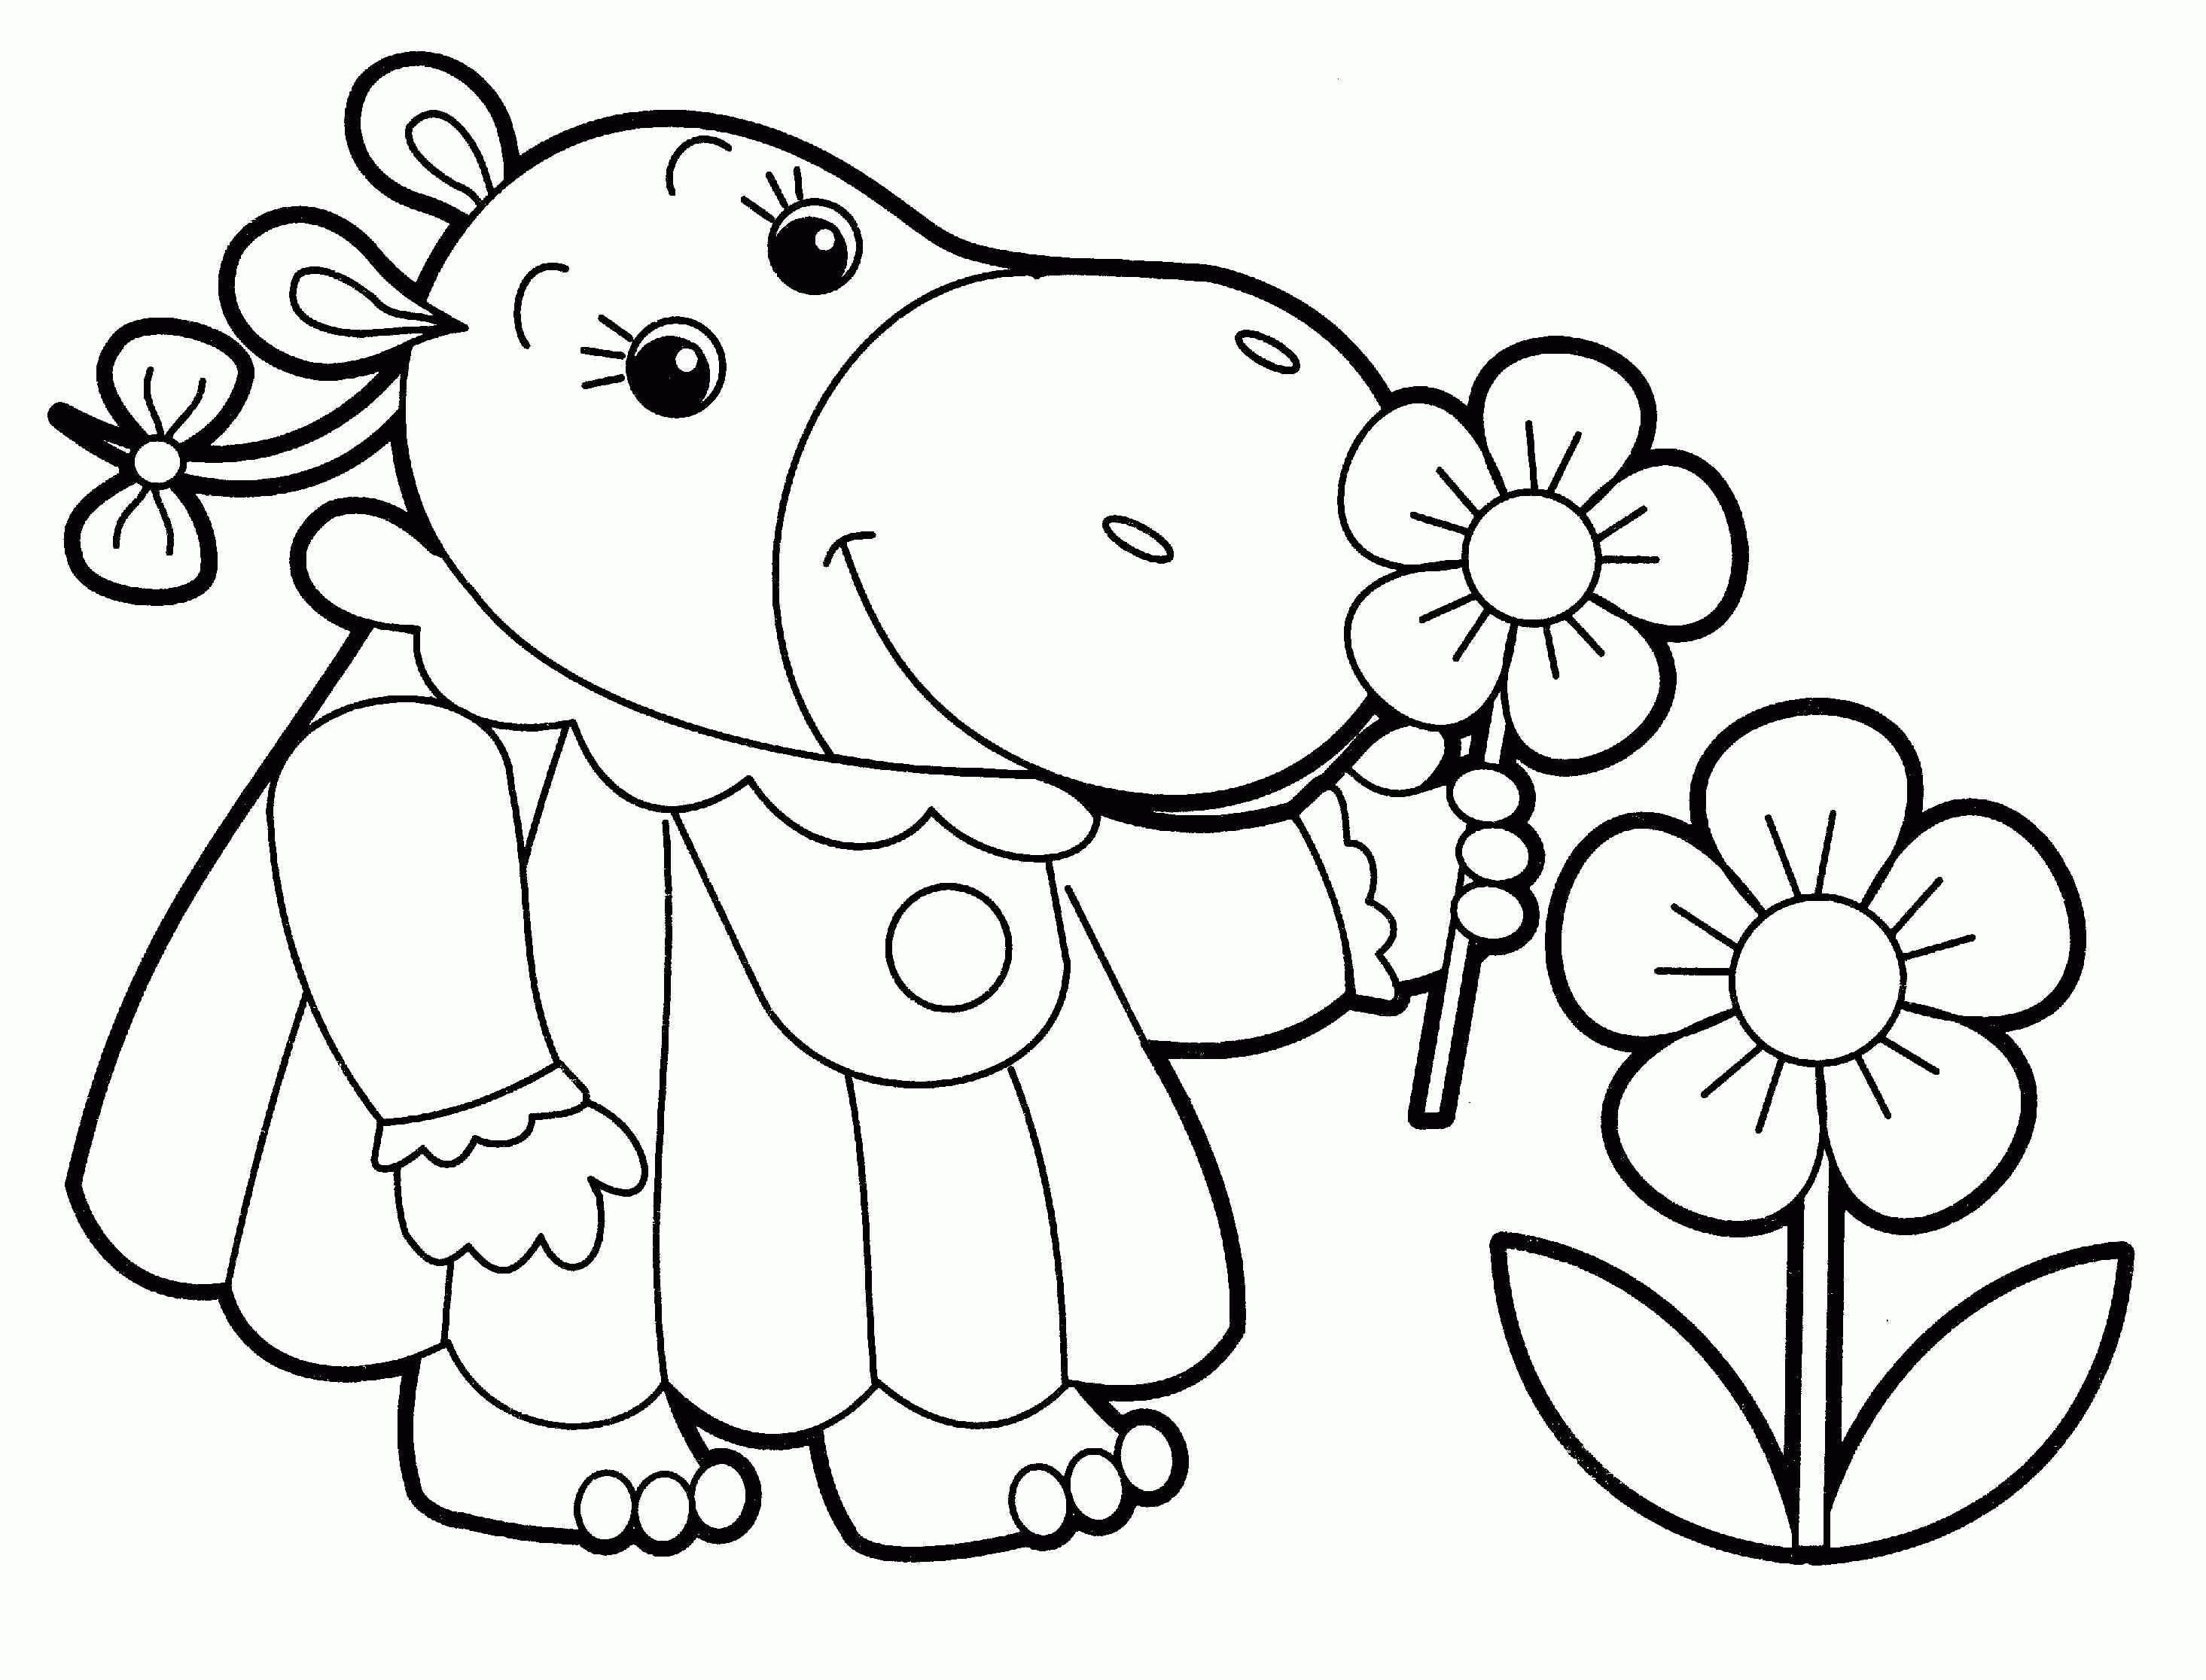 manual-coloring-pages-fisher-price-claudia-melvin-printable-coloring-home